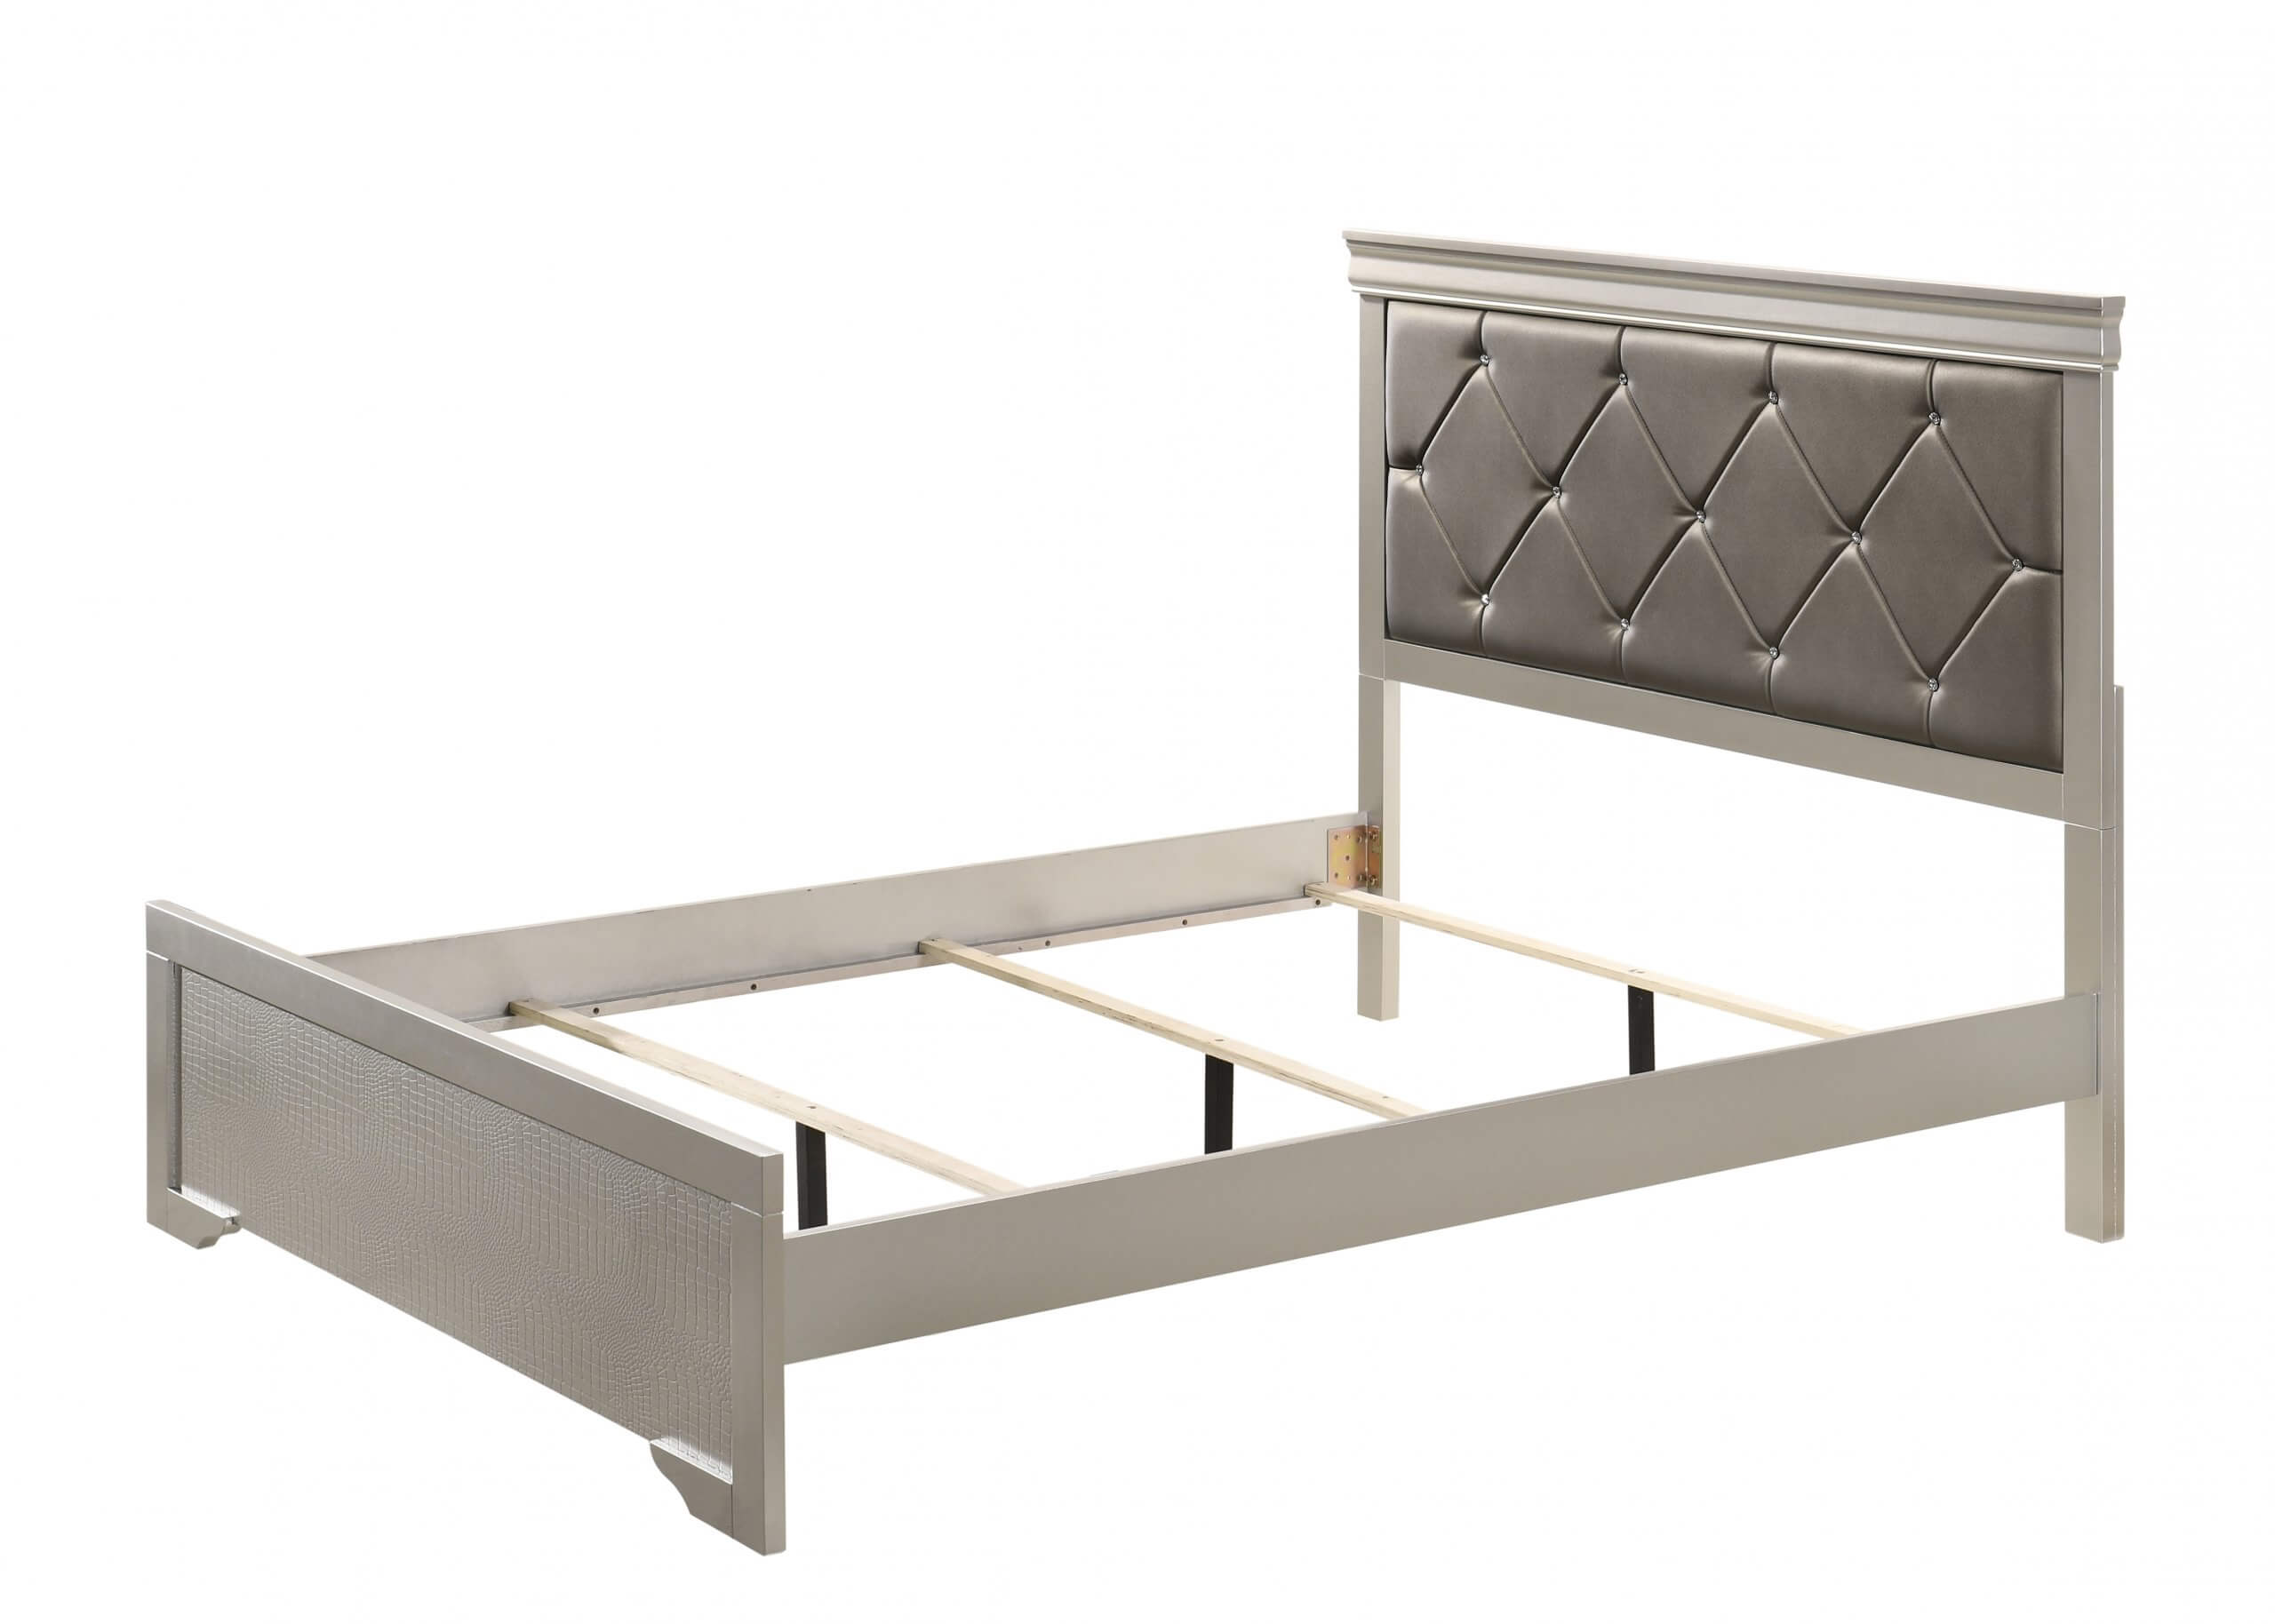 Amalia Silver Queen Sleigh Bed By Crown, Silver Queen Bed Frame With Headboard